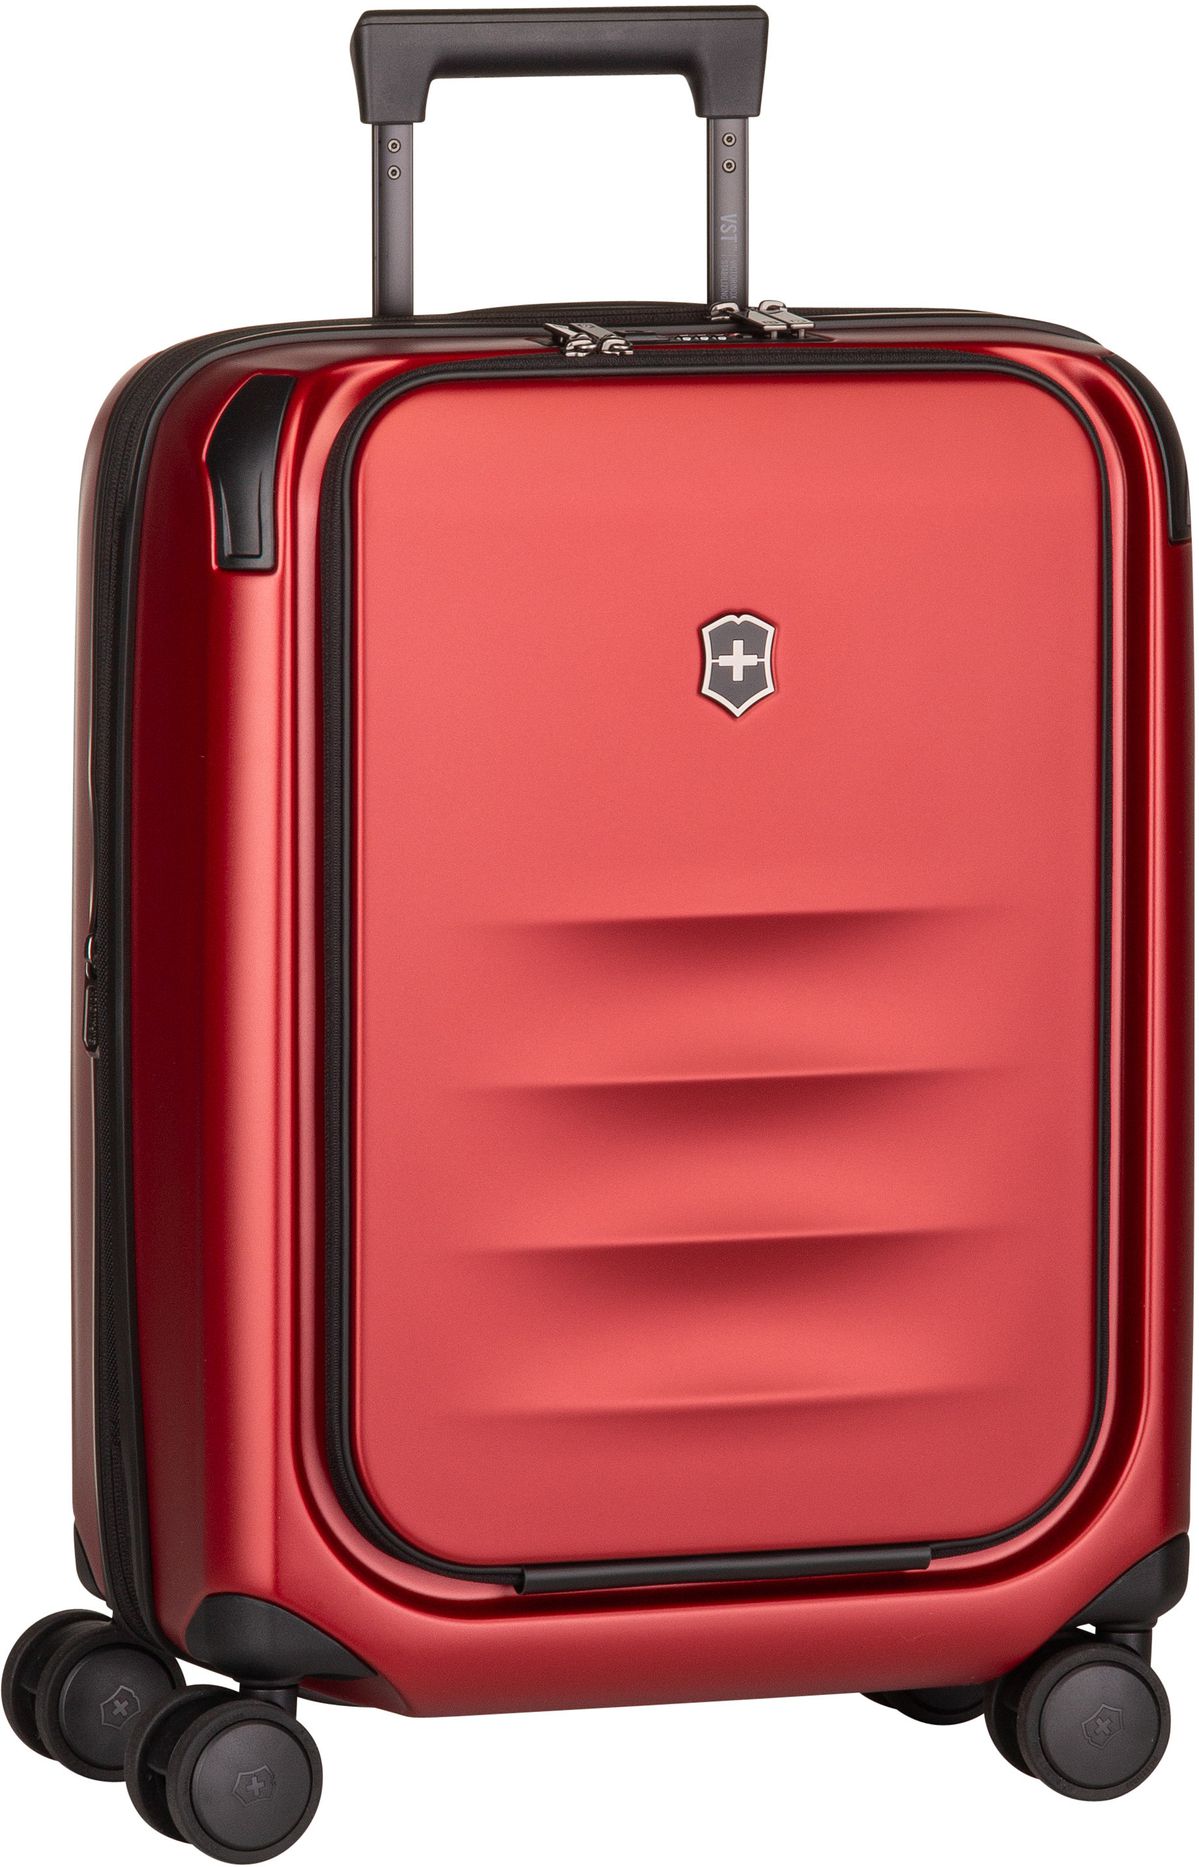 Victorinox Victorinox Spectra 3.0 Exp. Global Carry-On in Rot (39 Liter), Koffer & Trolley